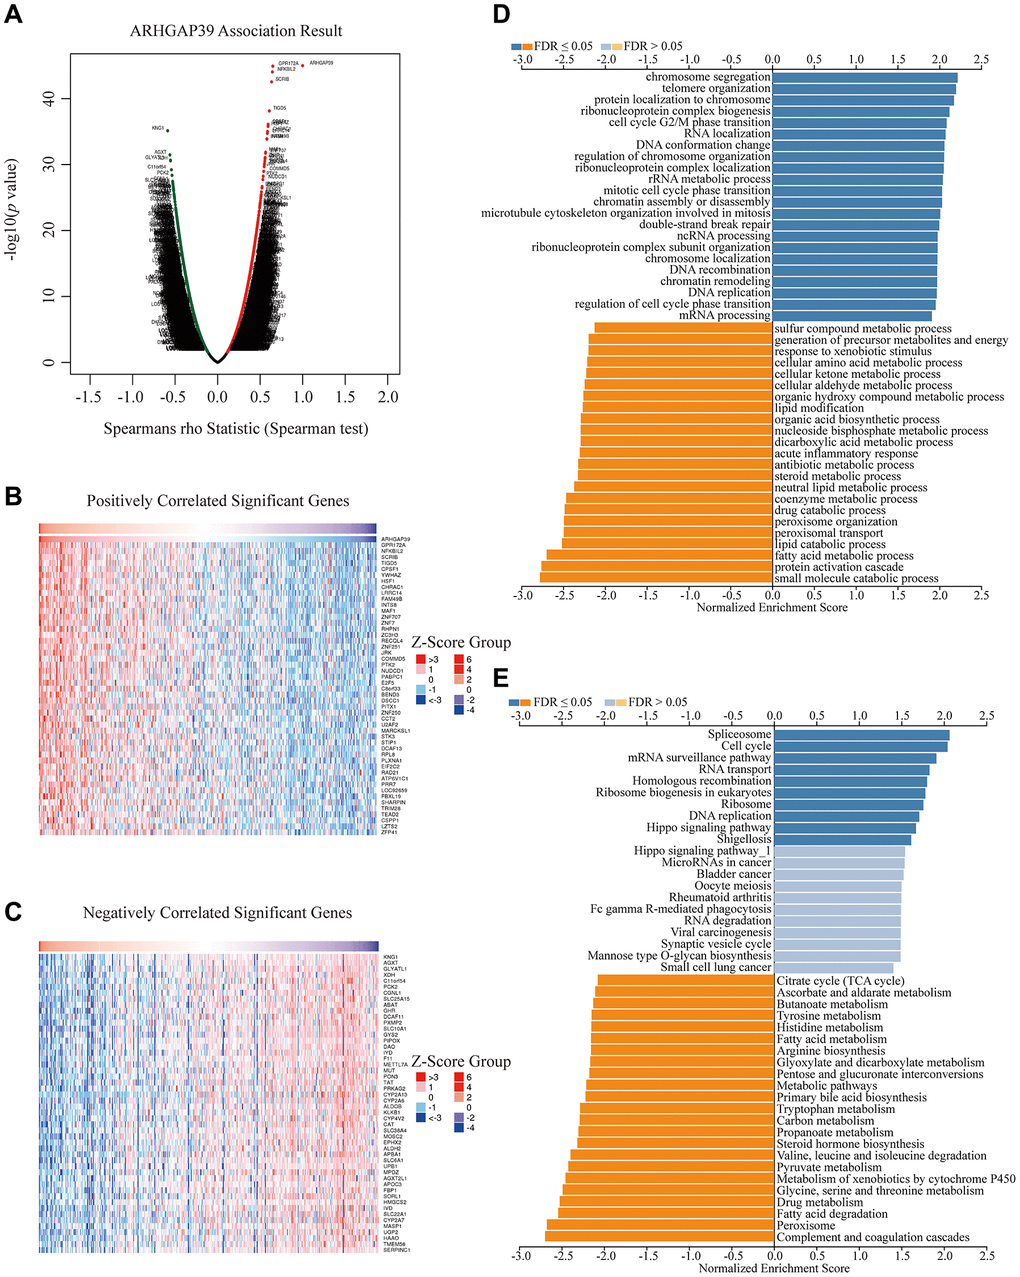 Enrichment analysis of ARHGAP39 functional networks in HCC. (A) A correlation analysis with spearman's rho value (p value 0.05) was used to assess correlations between ARHGAP39 and genes differentially expressed in HCC. (B, C) Heat maps show genes positively and negatively correlated with ARHGAP39 in HCC (Top 50). (D) GO pathway analysis. Dark blue and orange indicate FDR ≤ 0.05, light blue and orange indicate FDR > 0.05 in A. FDR, false discovery rate. (E) KEGG pathway analysis. Dark blue and orange indicate FDR ≤ 0.05, light blue and orange indicate FDR > 0.05 in. FDR q-val: false discovery rate.